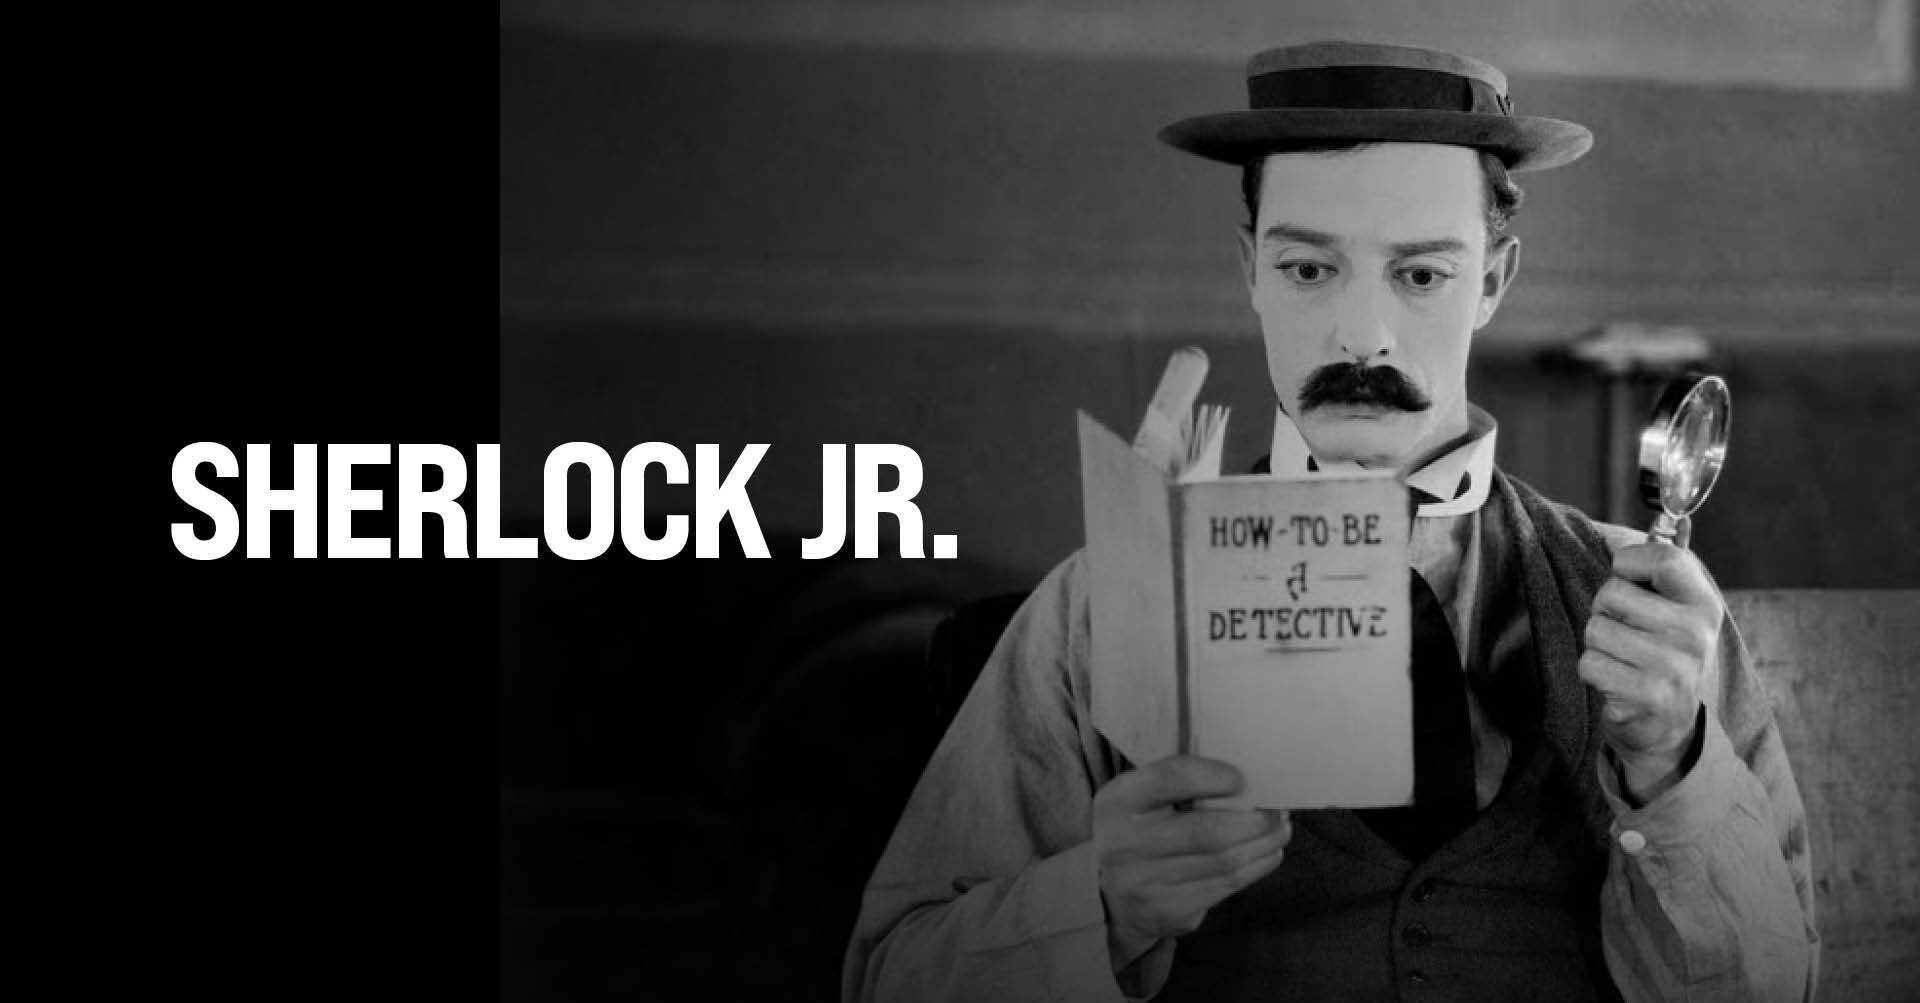 37-facts-about-the-movie-sherlock-jr